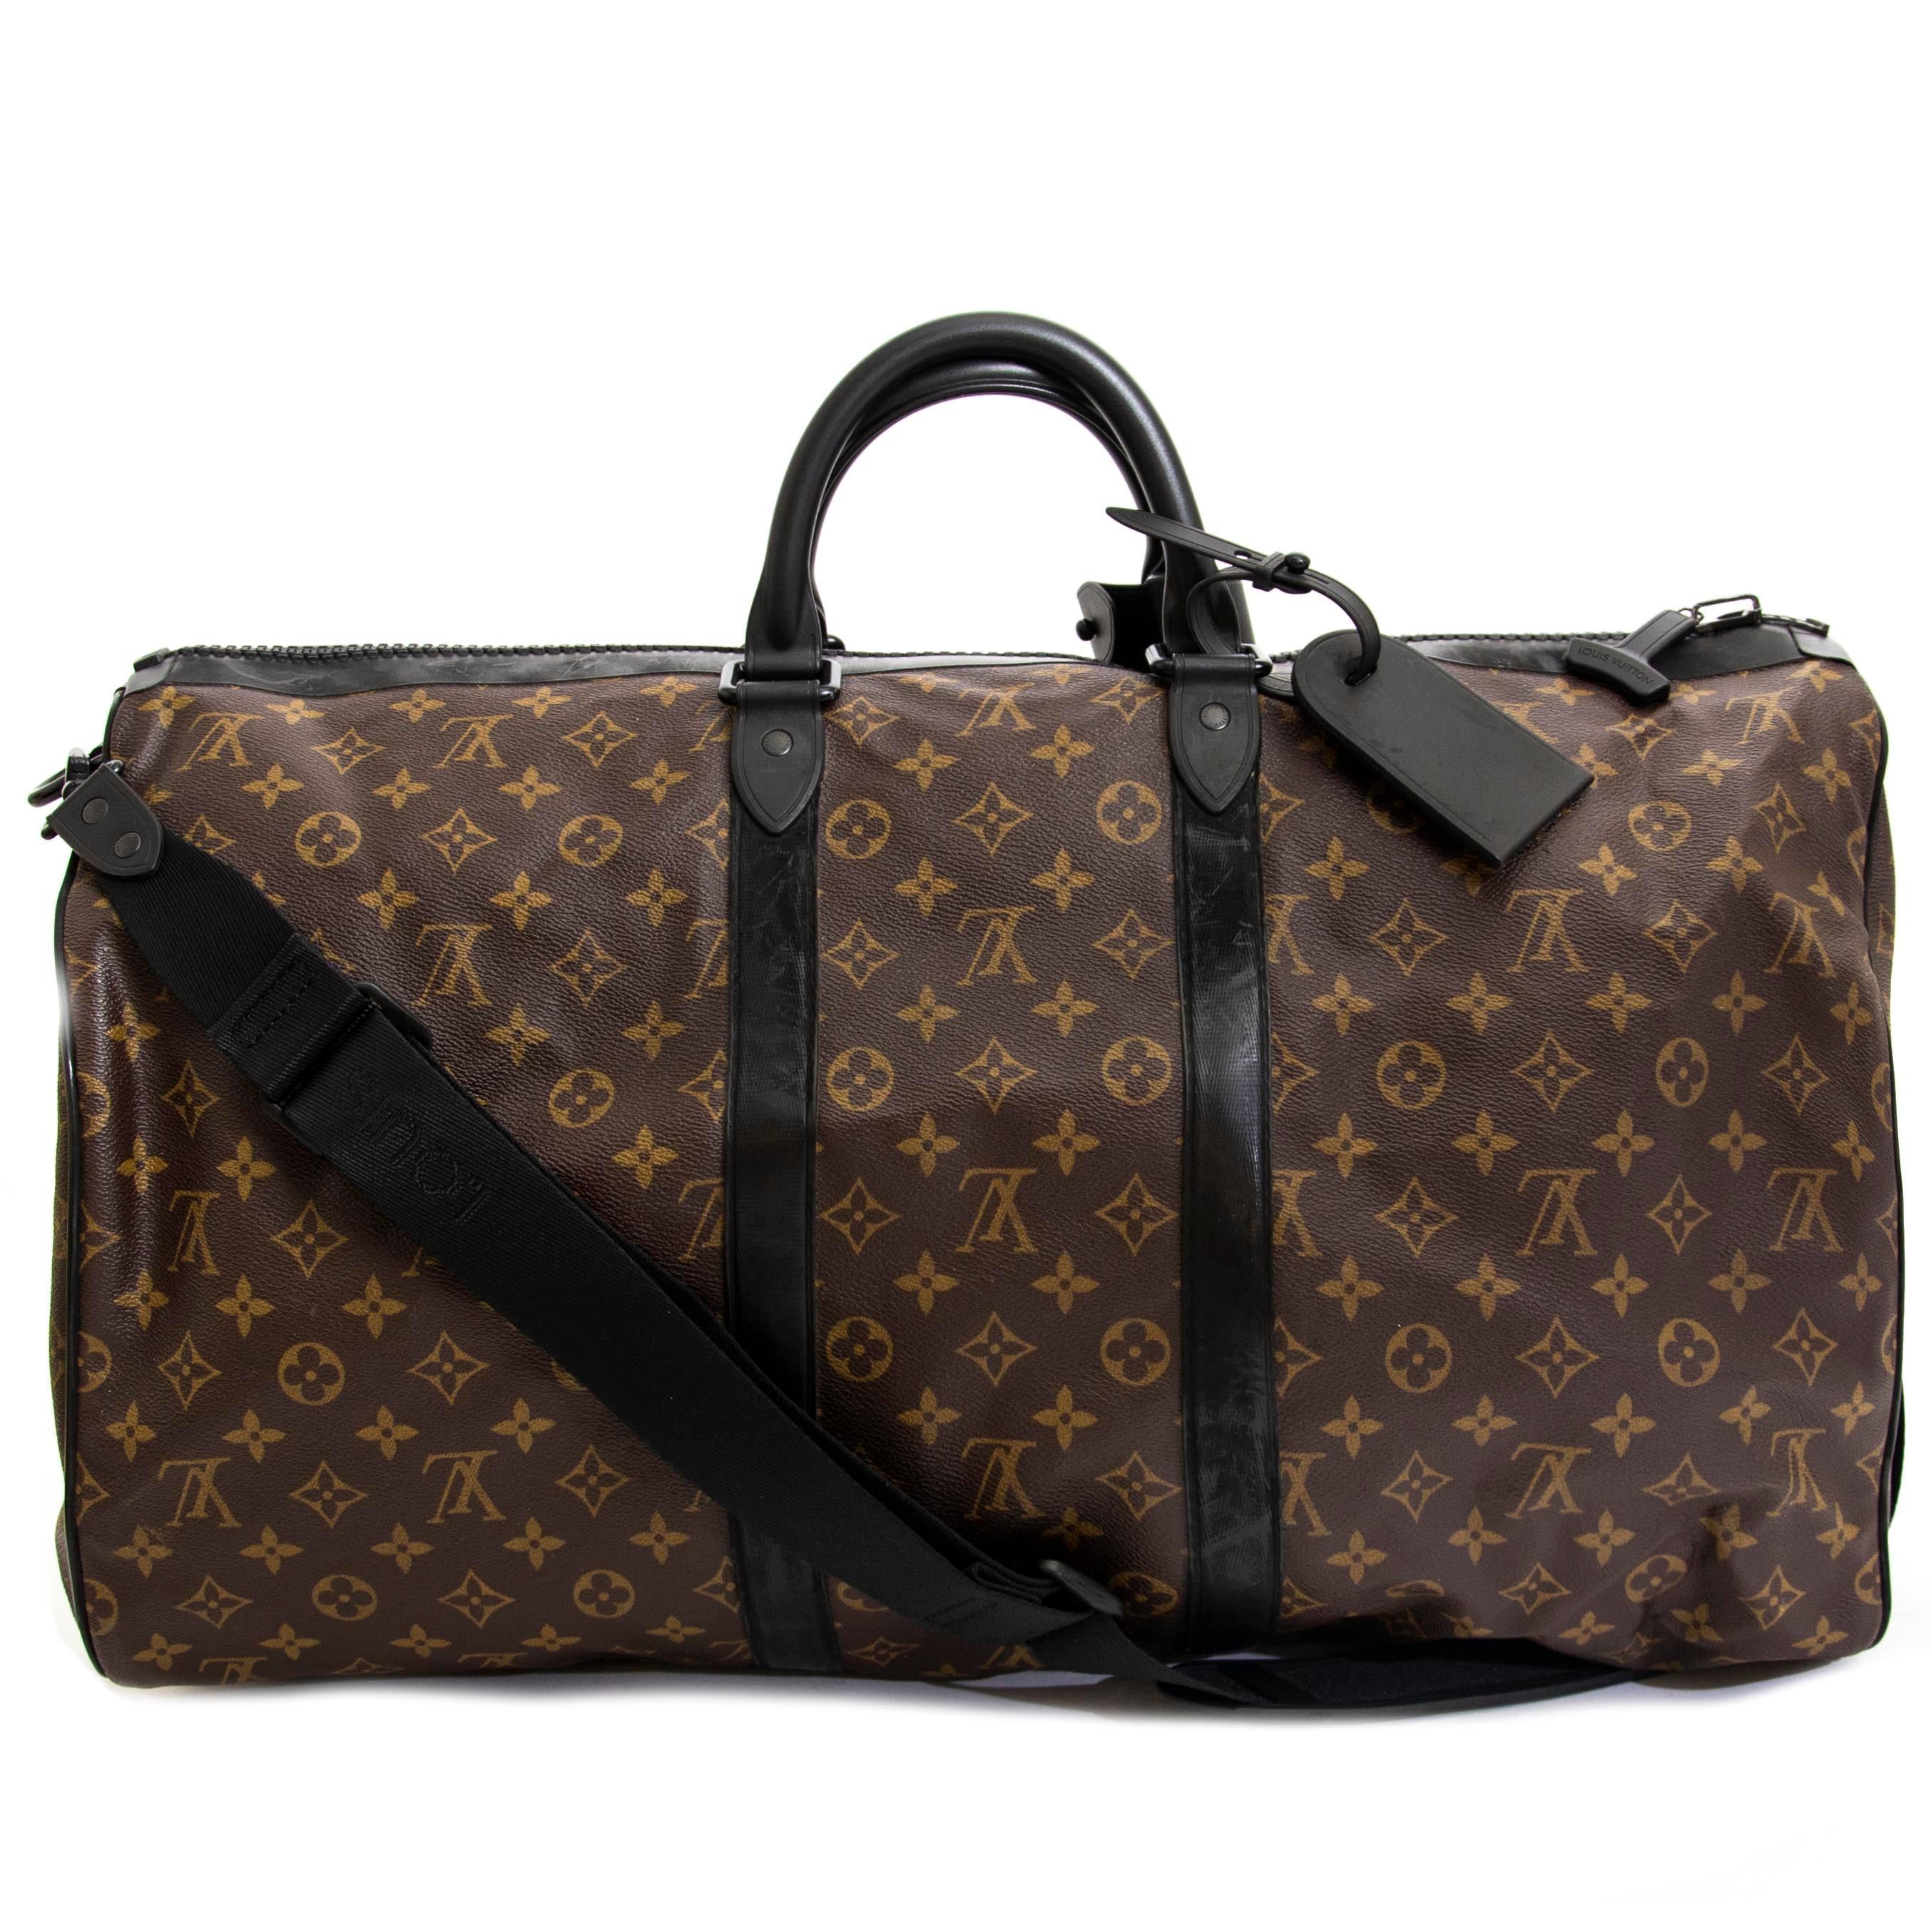 Very good condition

Louis Vuitton Waterproof KeepAll 55 Bandoulière

All you would expect from the iconic Louis Vuitton Keepall bag in Monogram canvas with the extra benefit of being completely waterproof. Combines style and practicality for all